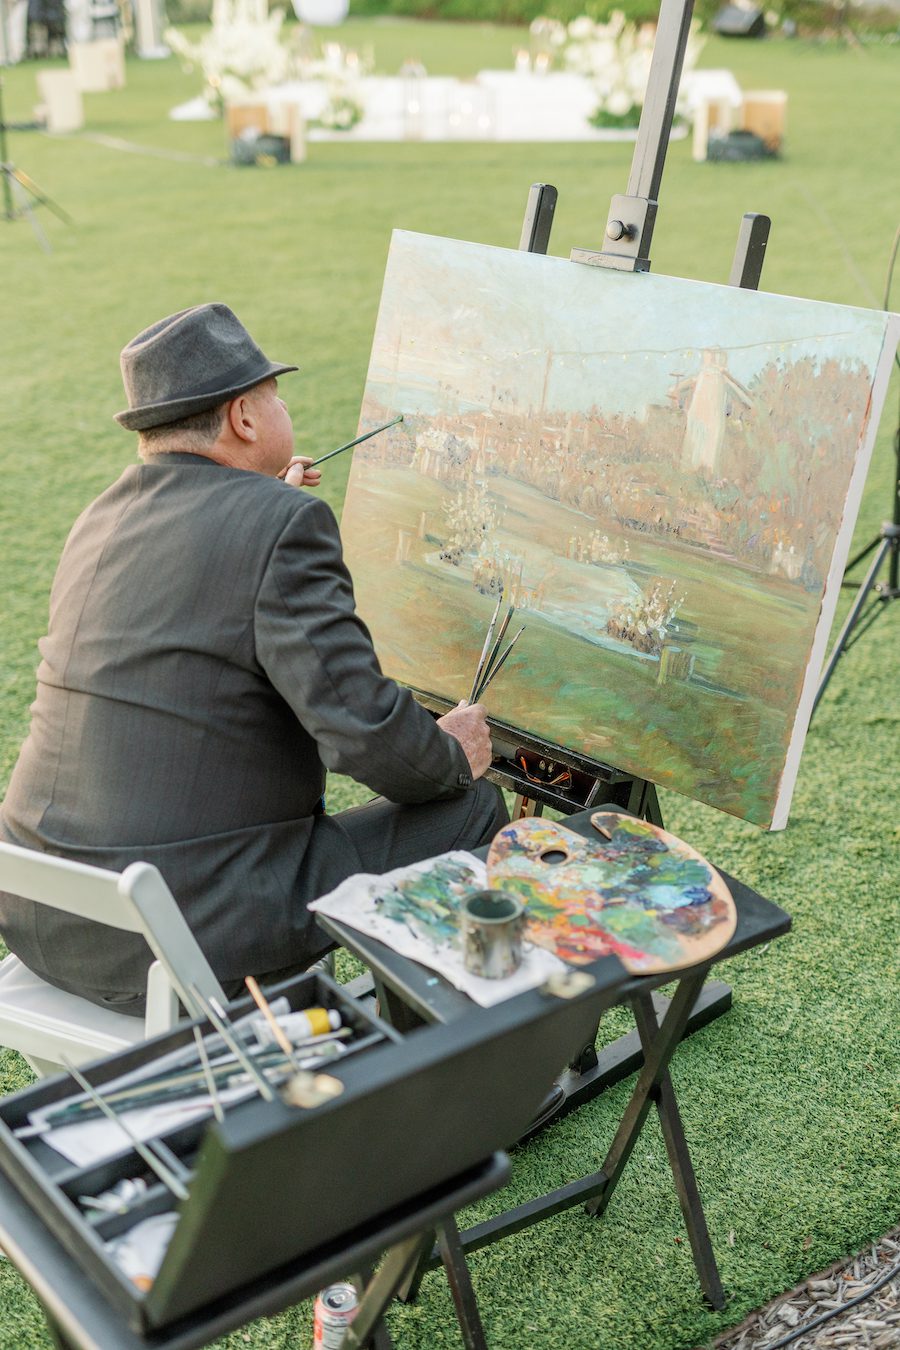 Live artist at this luxury 20 year anniversary and ocean view proposal in southern California